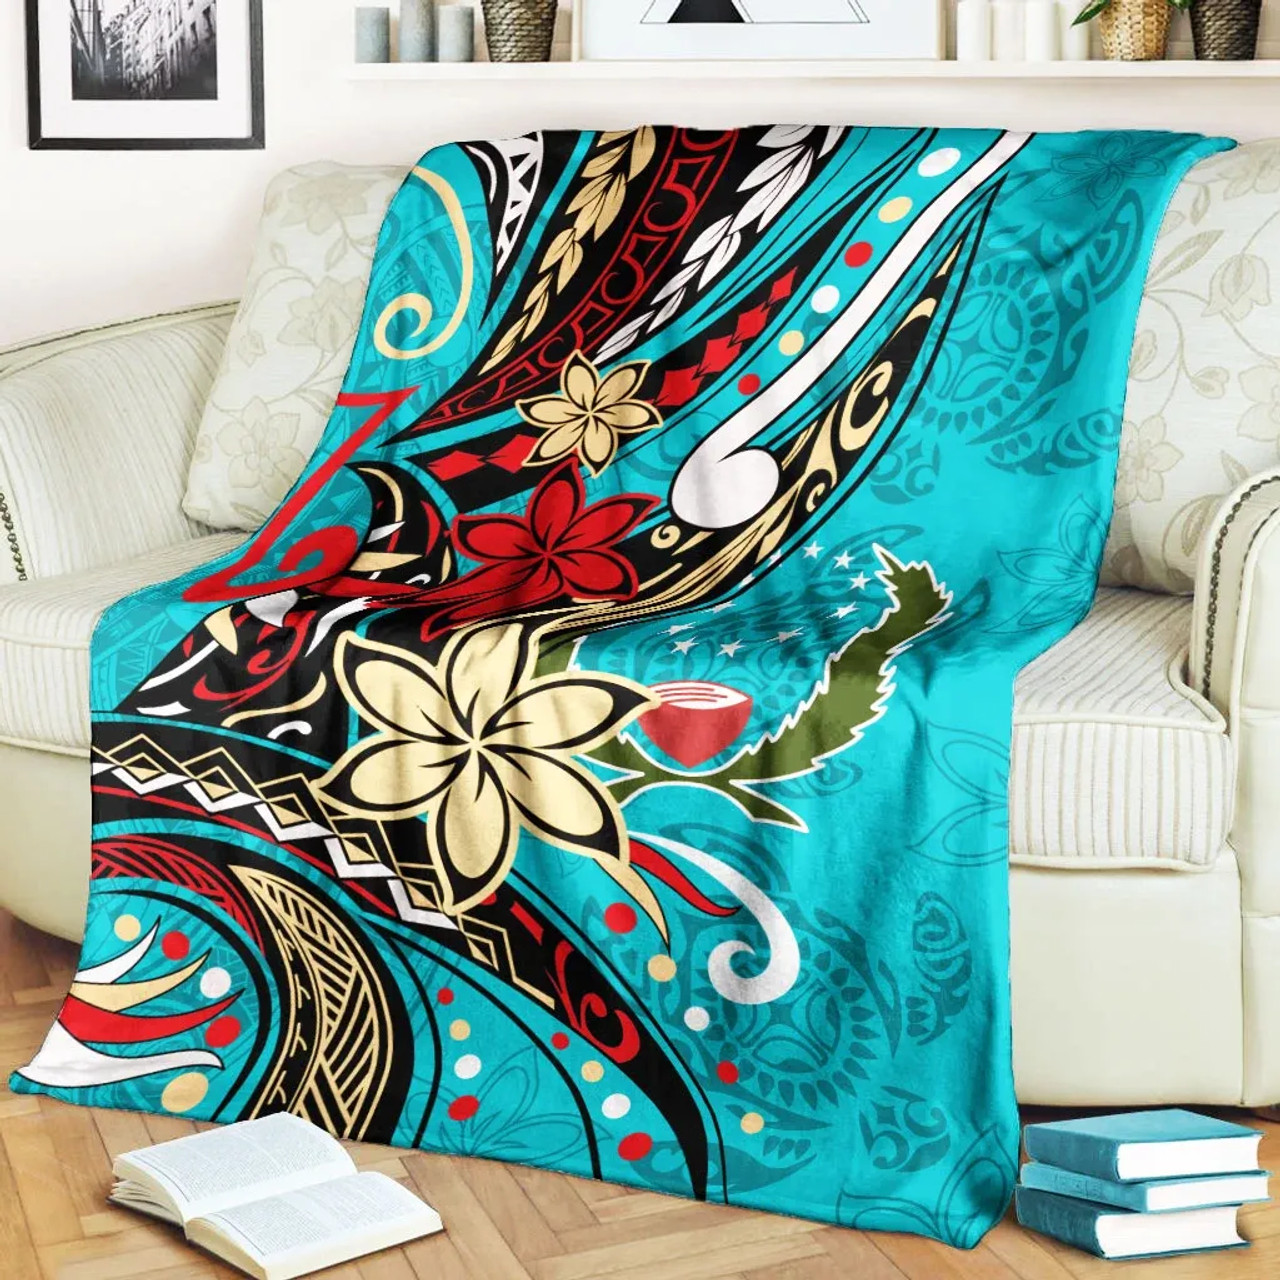 Pohnpei Premium Blanket - Tribal Flower With Special Turtles Blue Color 2